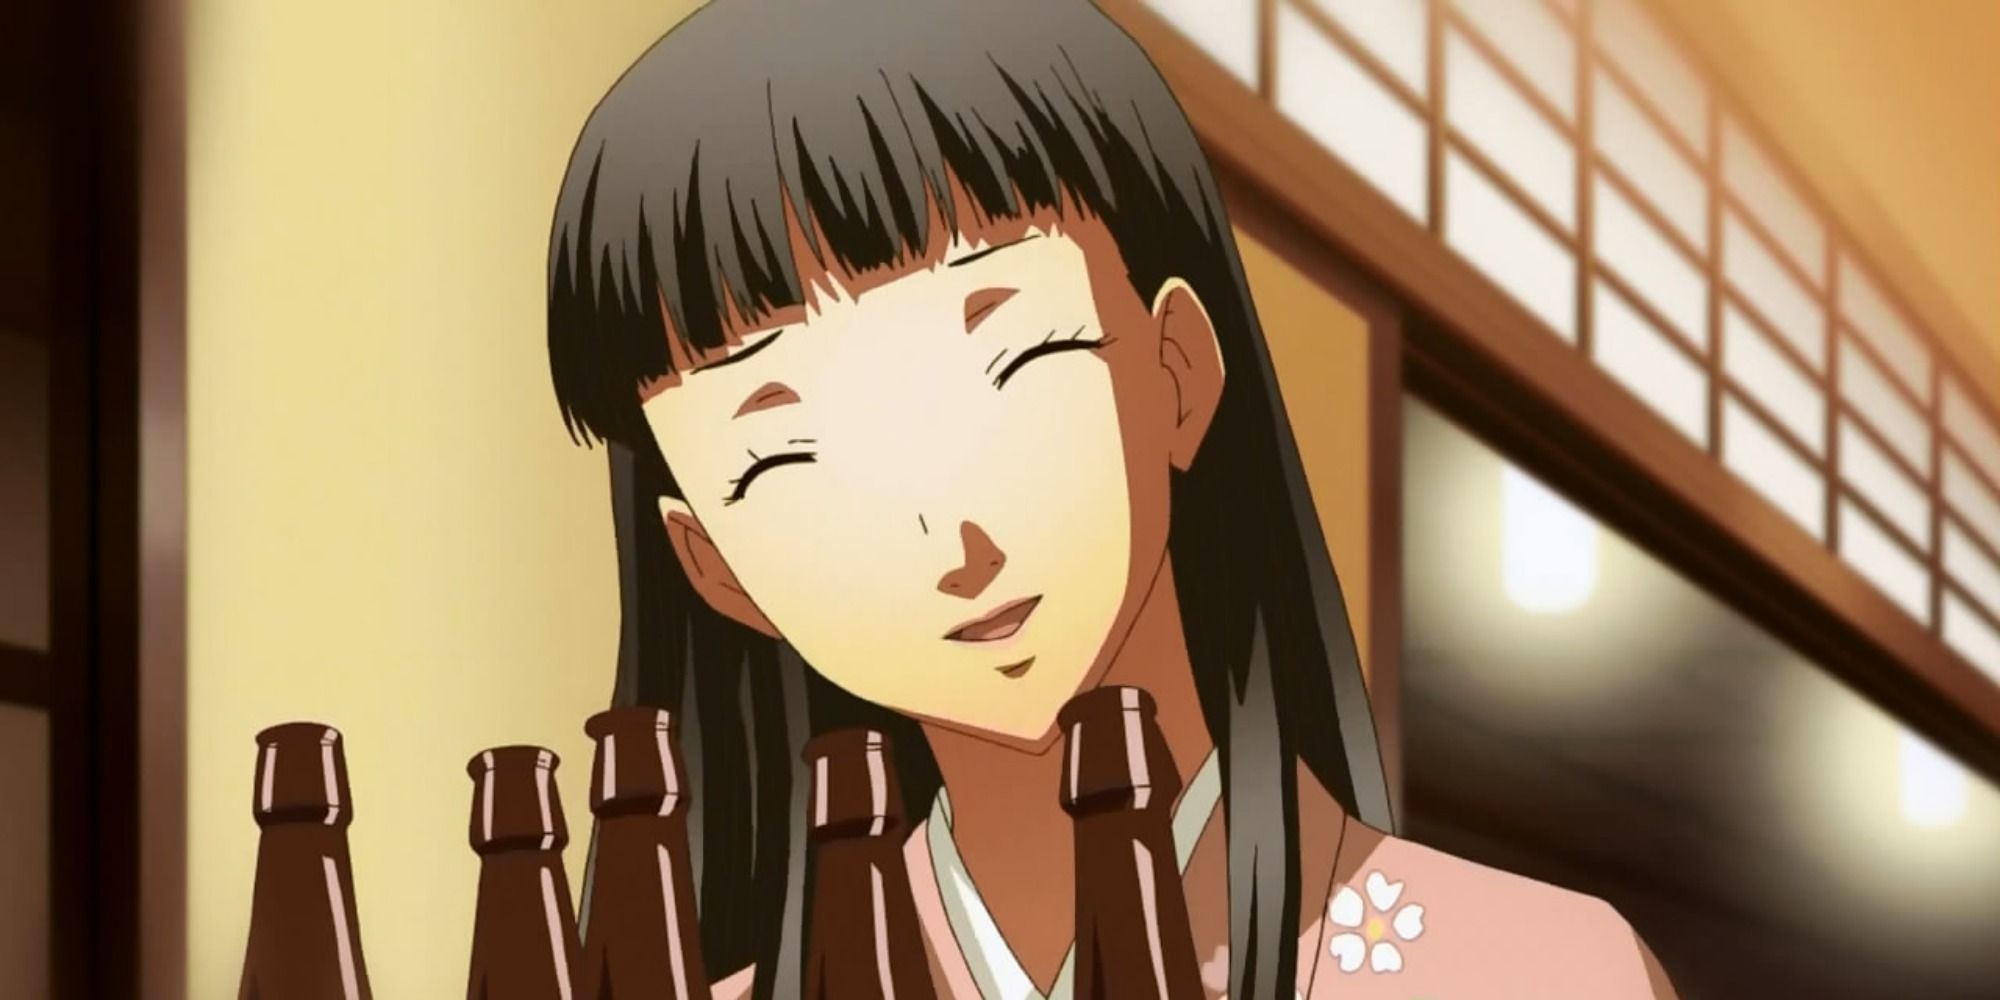 Yukiko Amagi serving some beers in the Persona 4 Golden anime